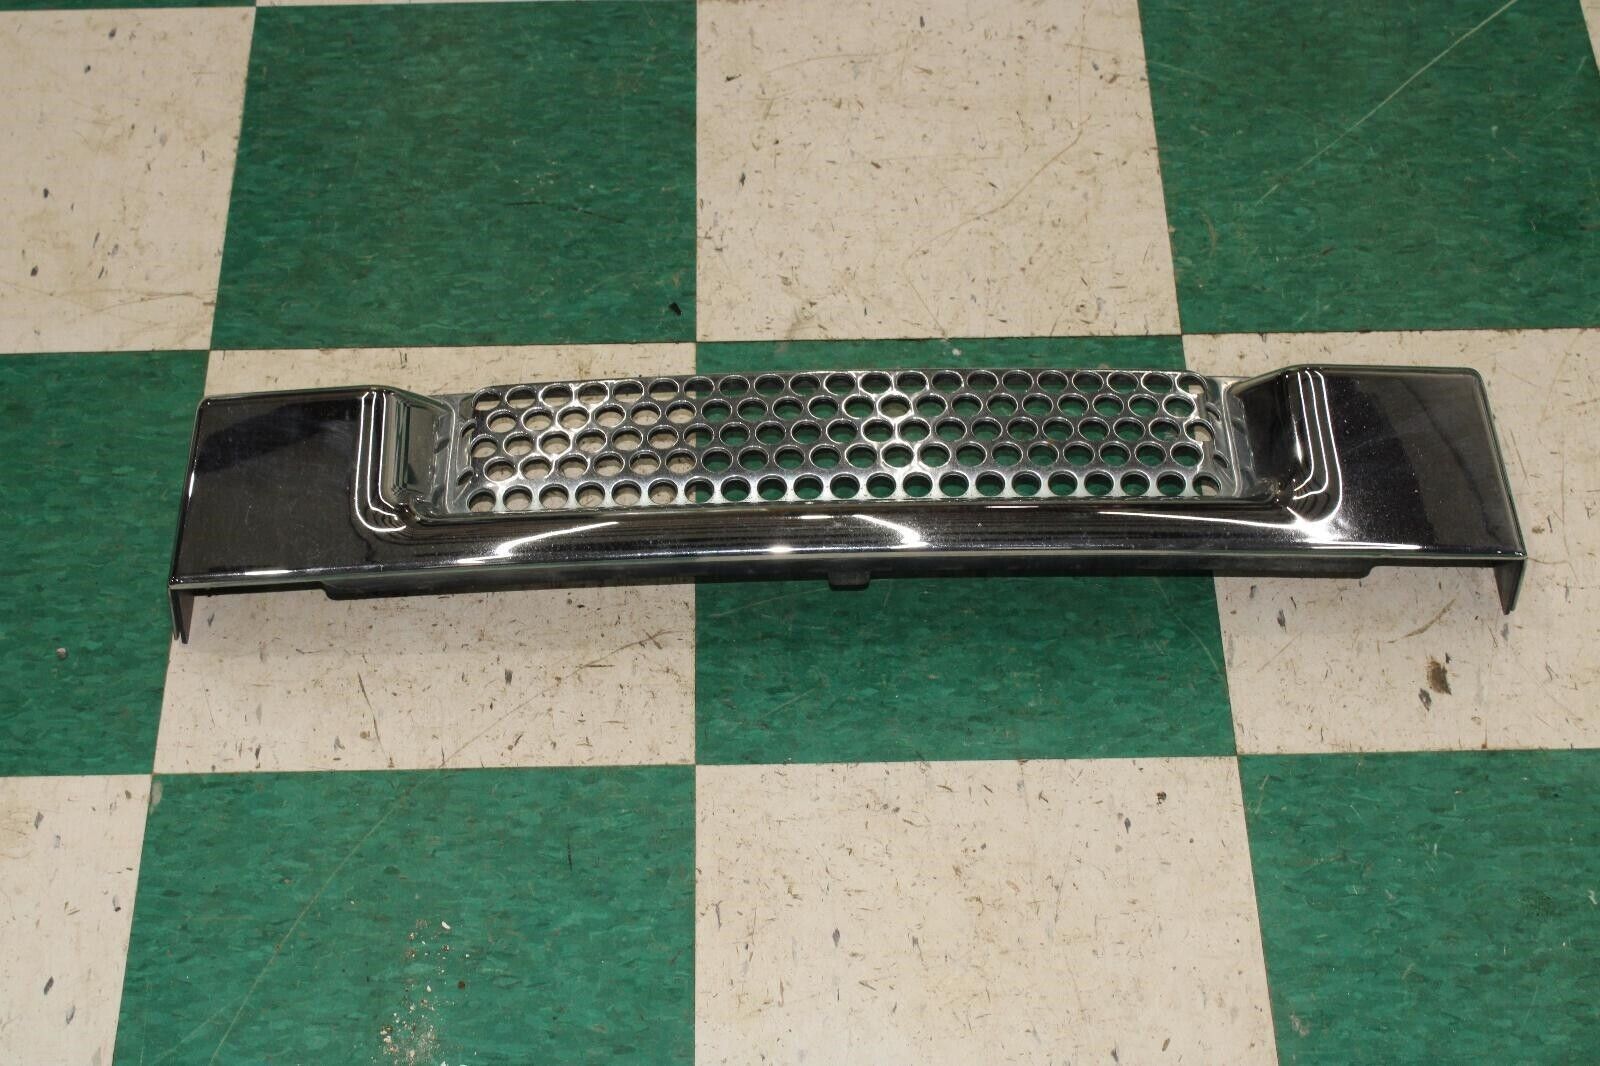 03-07 Hummer H2 Chrome Front End Radiator Lower Grille Grill Trim Panel